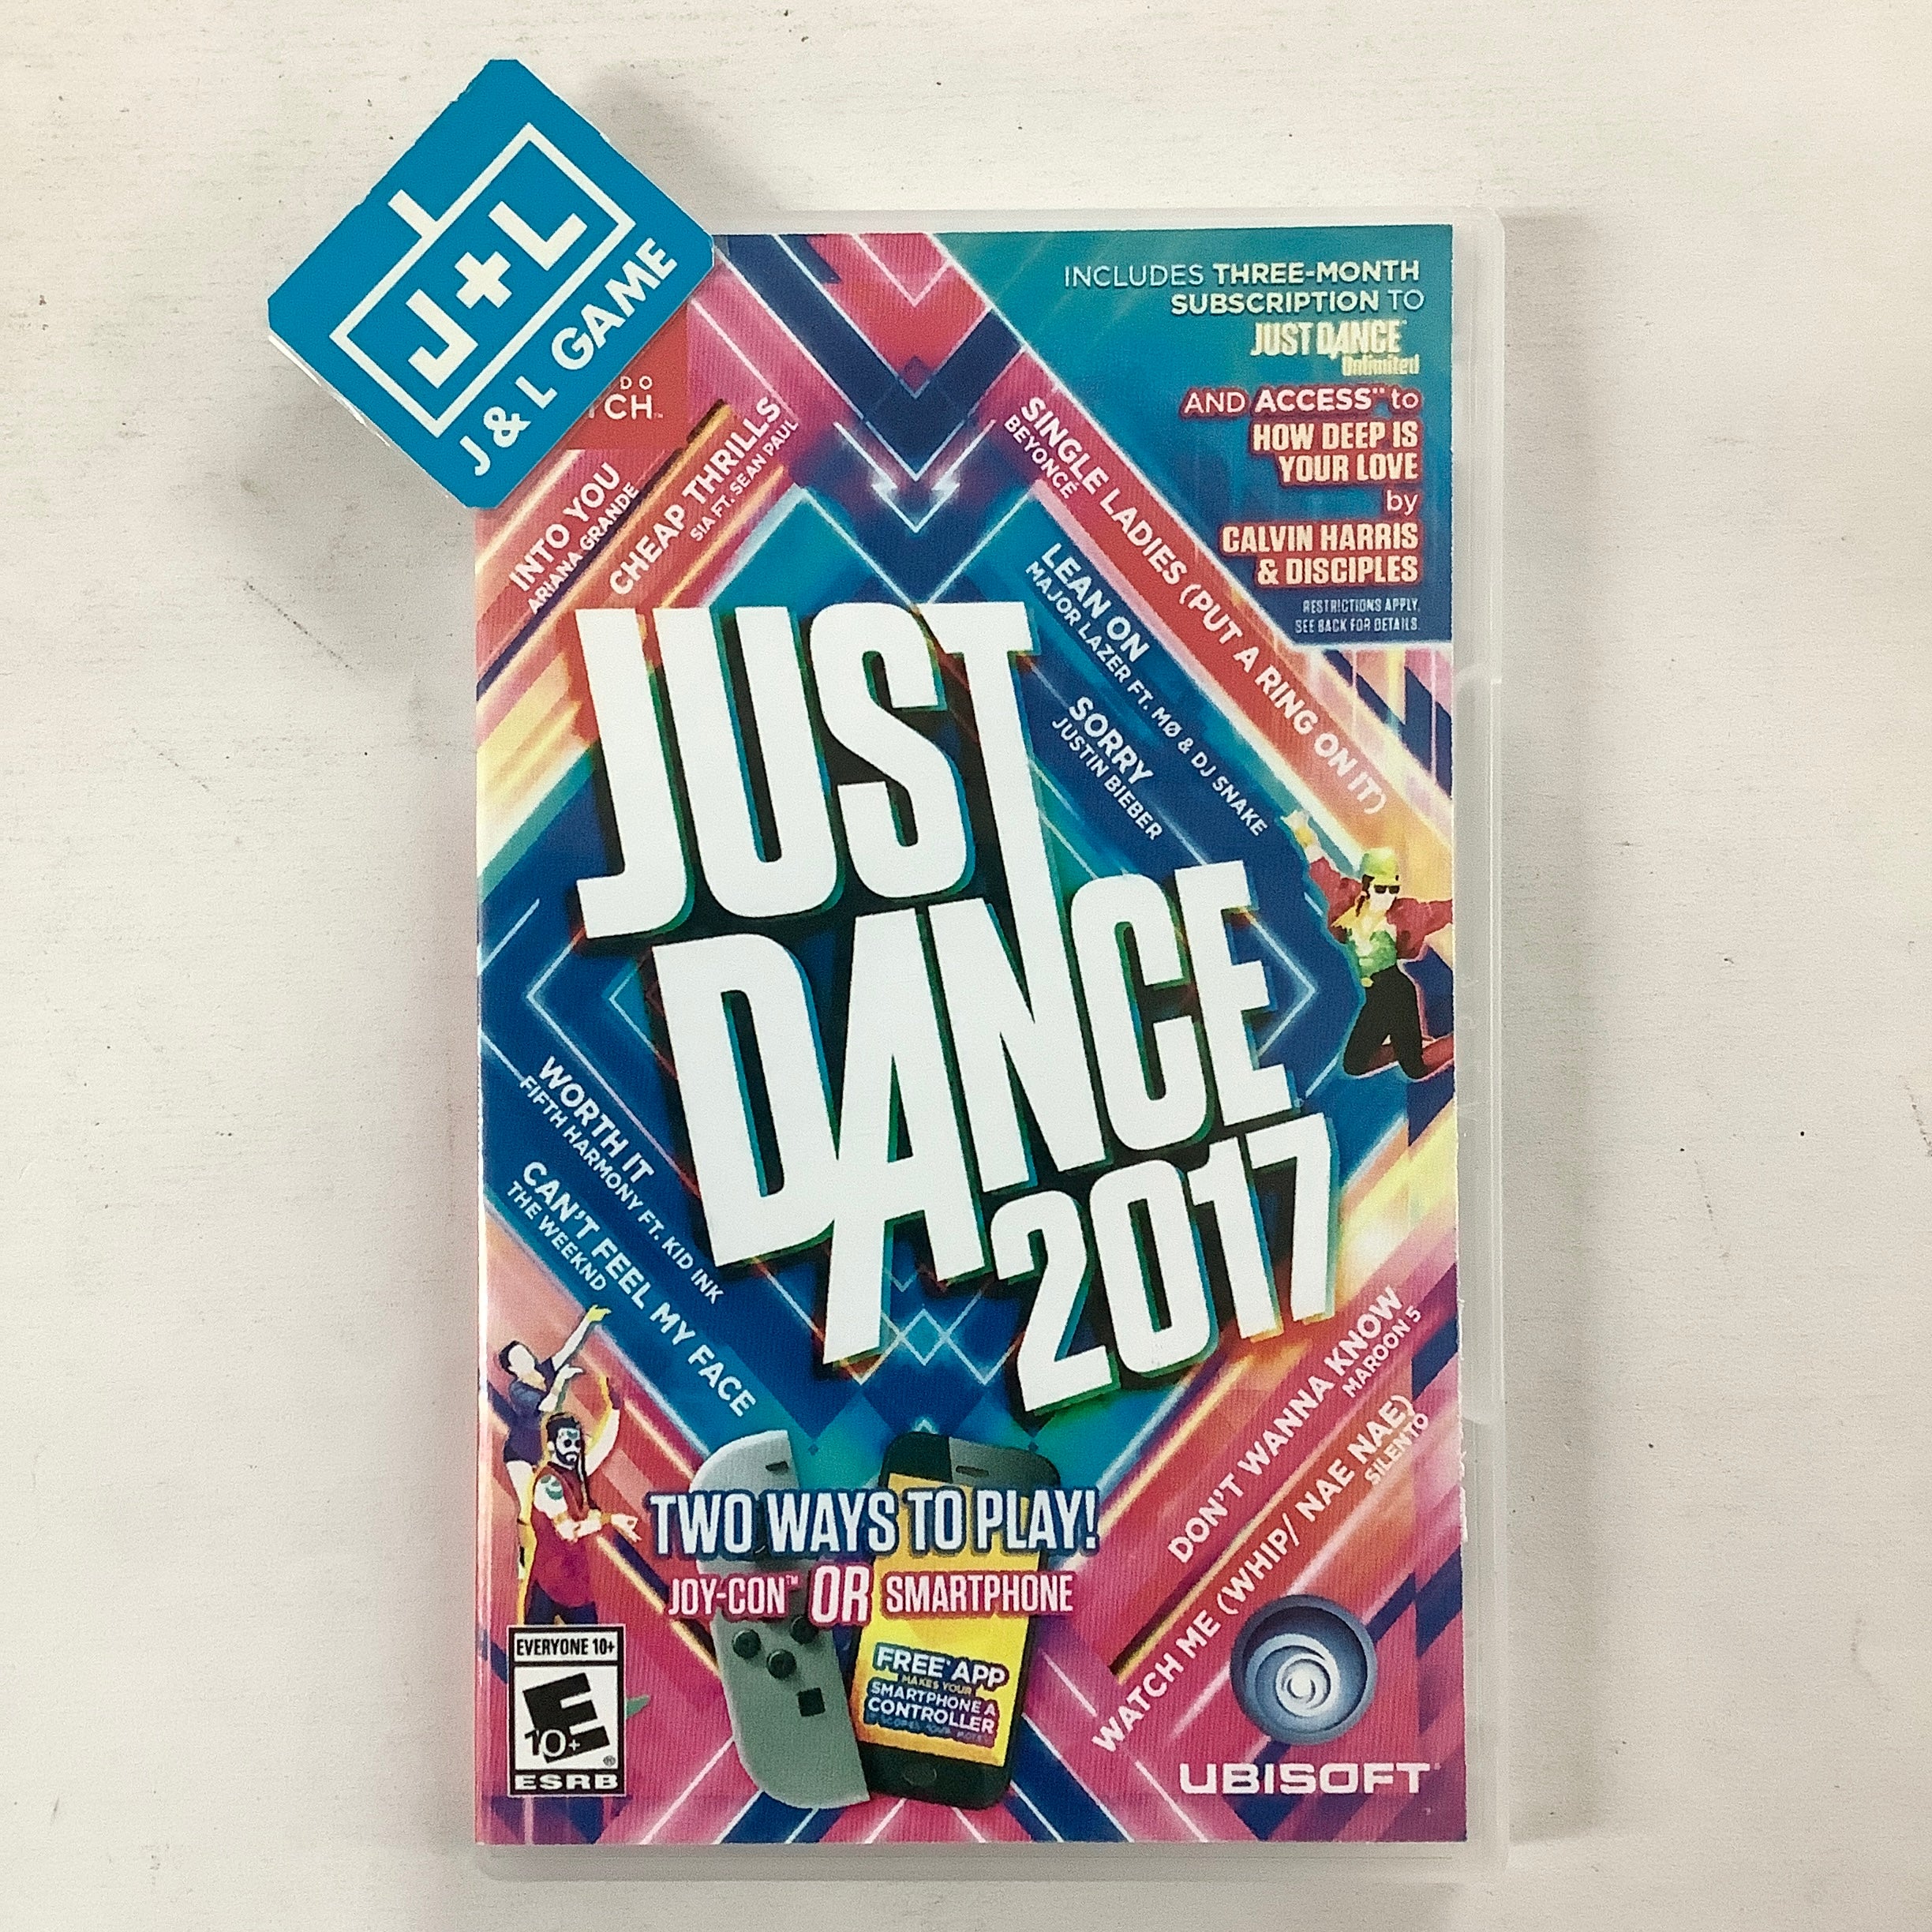 Just Dance 2017 - (NSW) Nintendo Switch [Pre-Owned] Video Games Ubisoft   